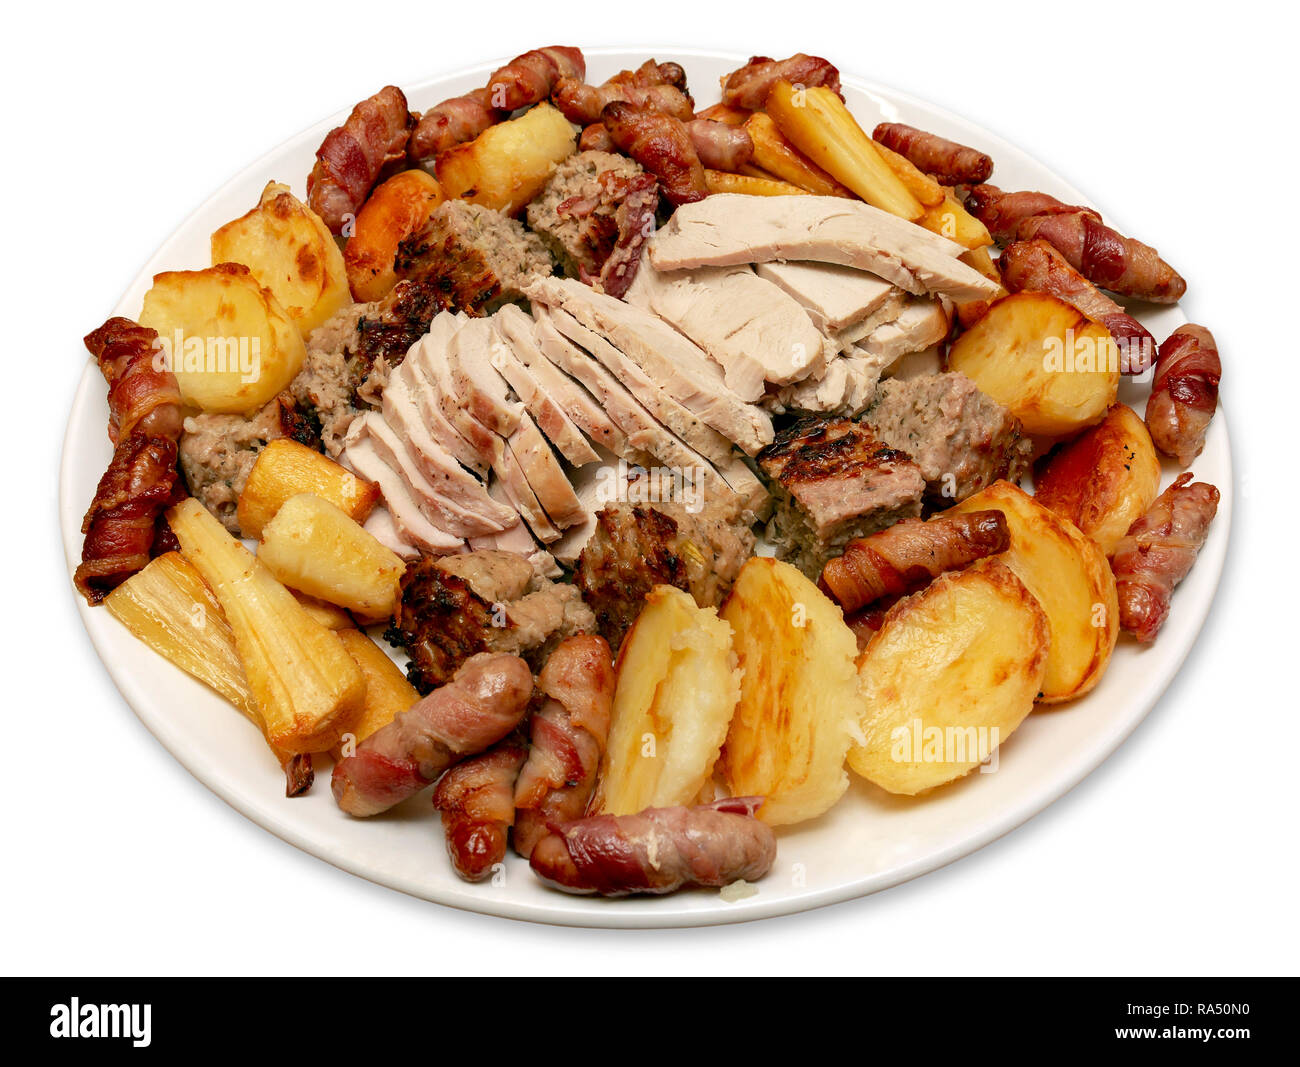 Roast turkey dinner serving platter with potatoes, parsnips, pigs in blankets and stuffing on an isolated white background Stock Photo